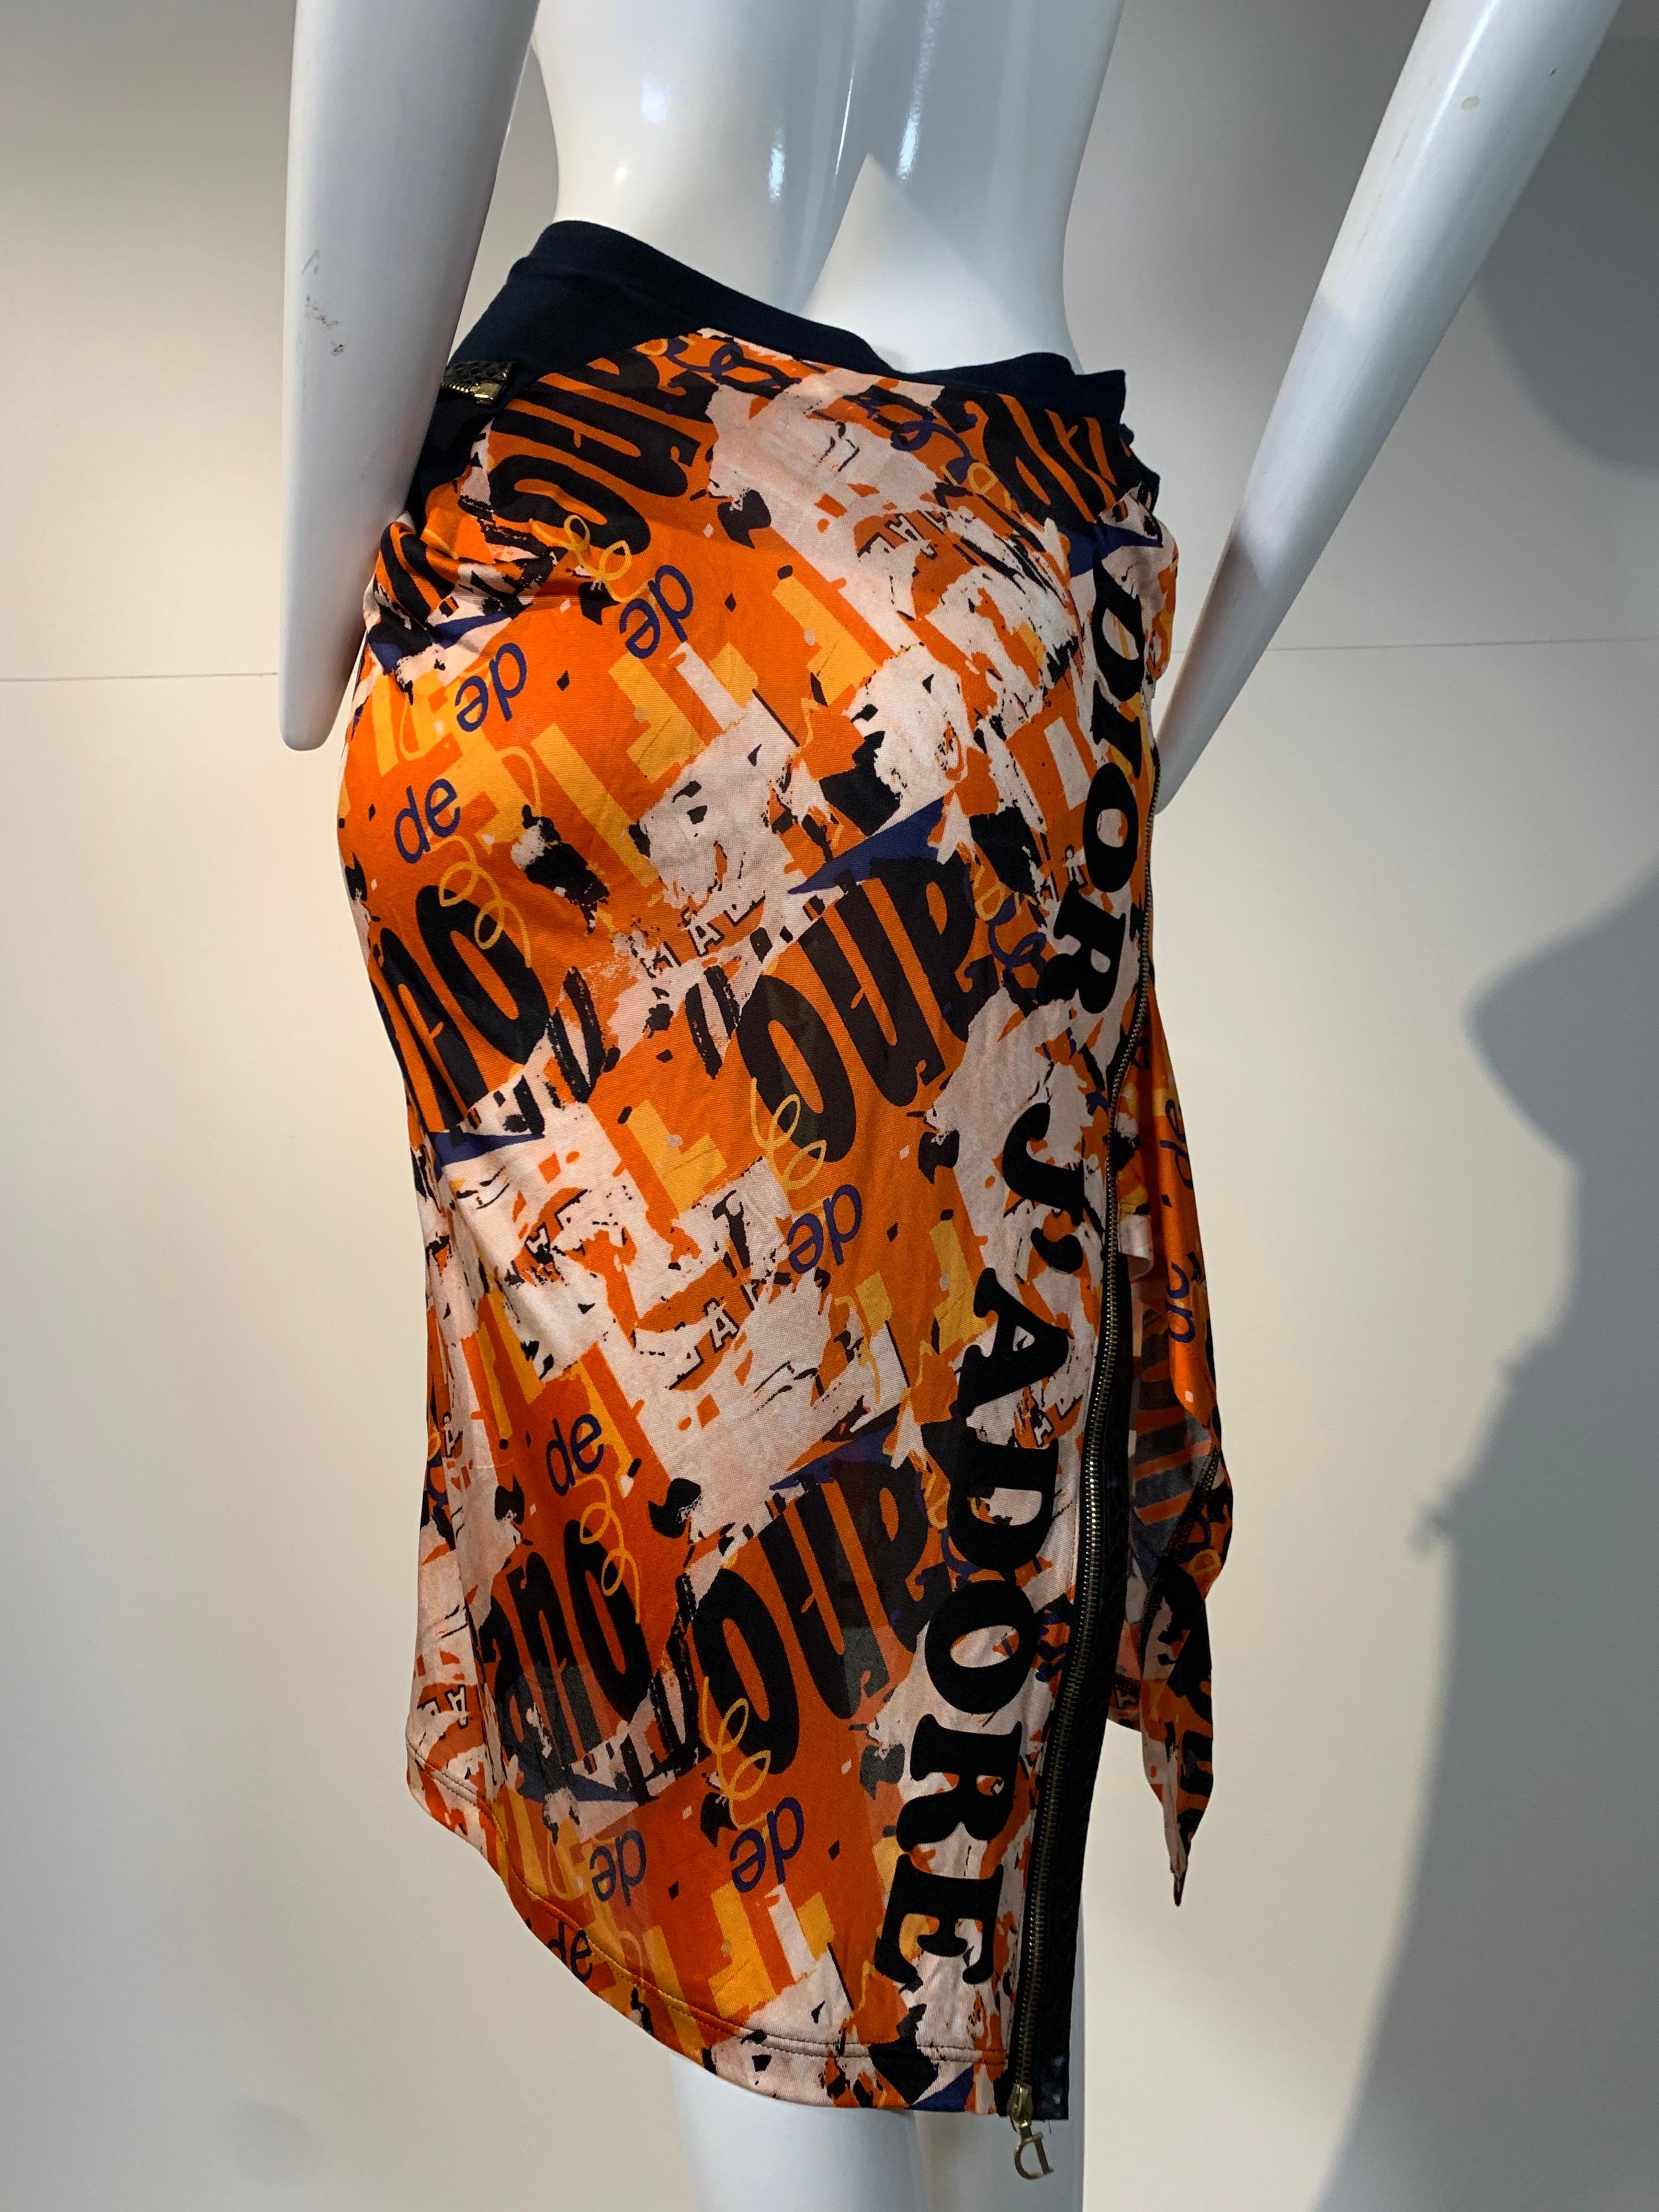 J’Adore Christian Dior by John Galliano orange graphic print silk jersey skirt. Side exposed zipper with snakeskin placket and 